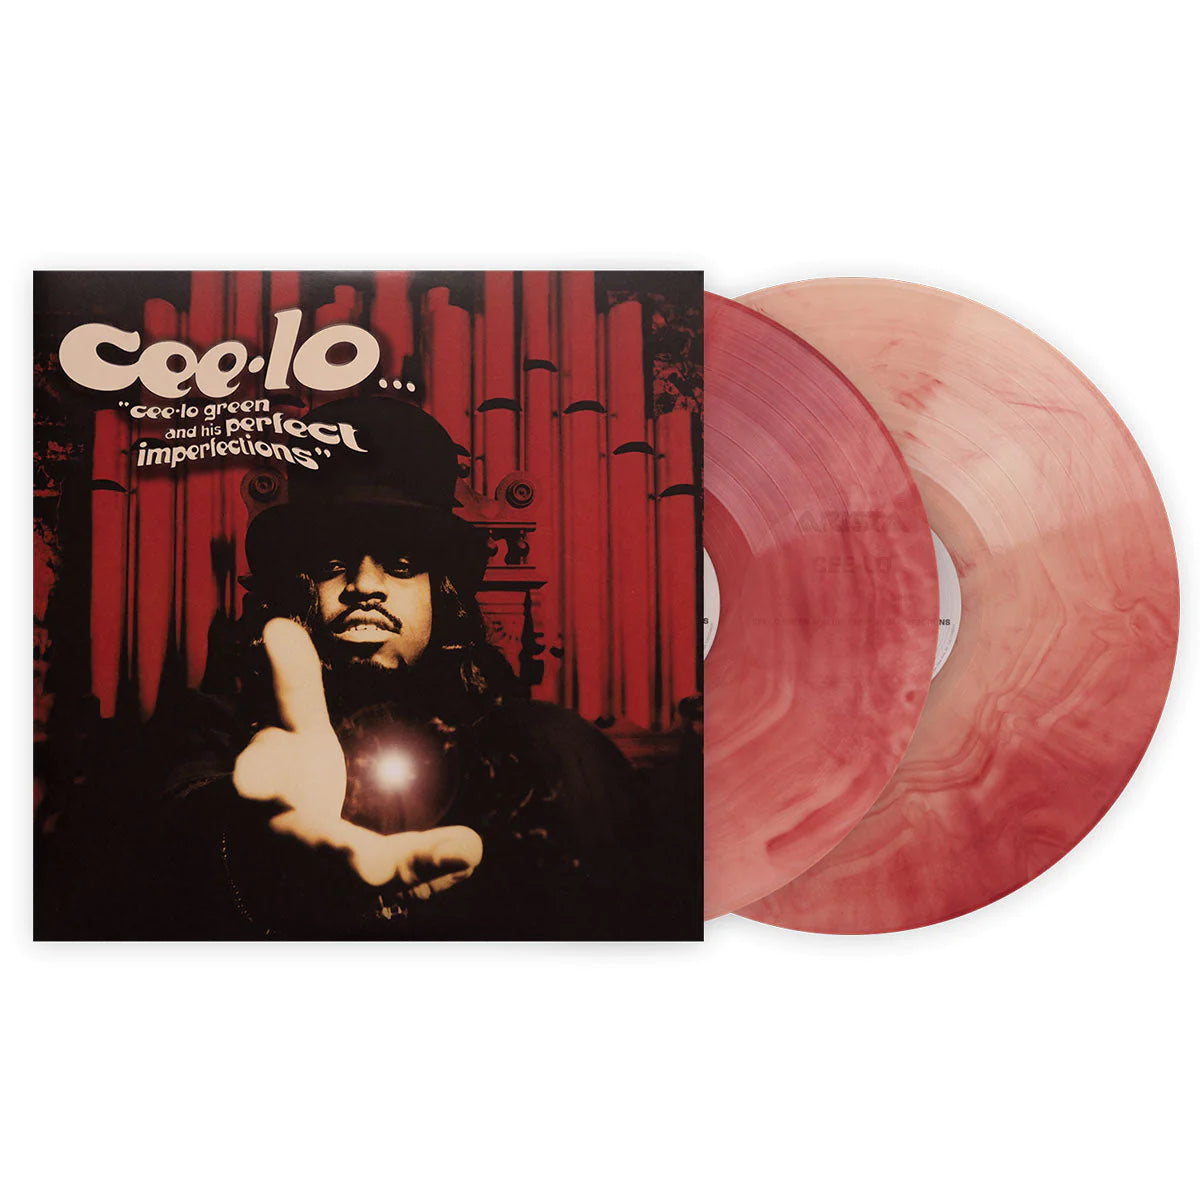 Ceelo Green And His Perfect Imperfections album on red galaxy colored vinyl LP record